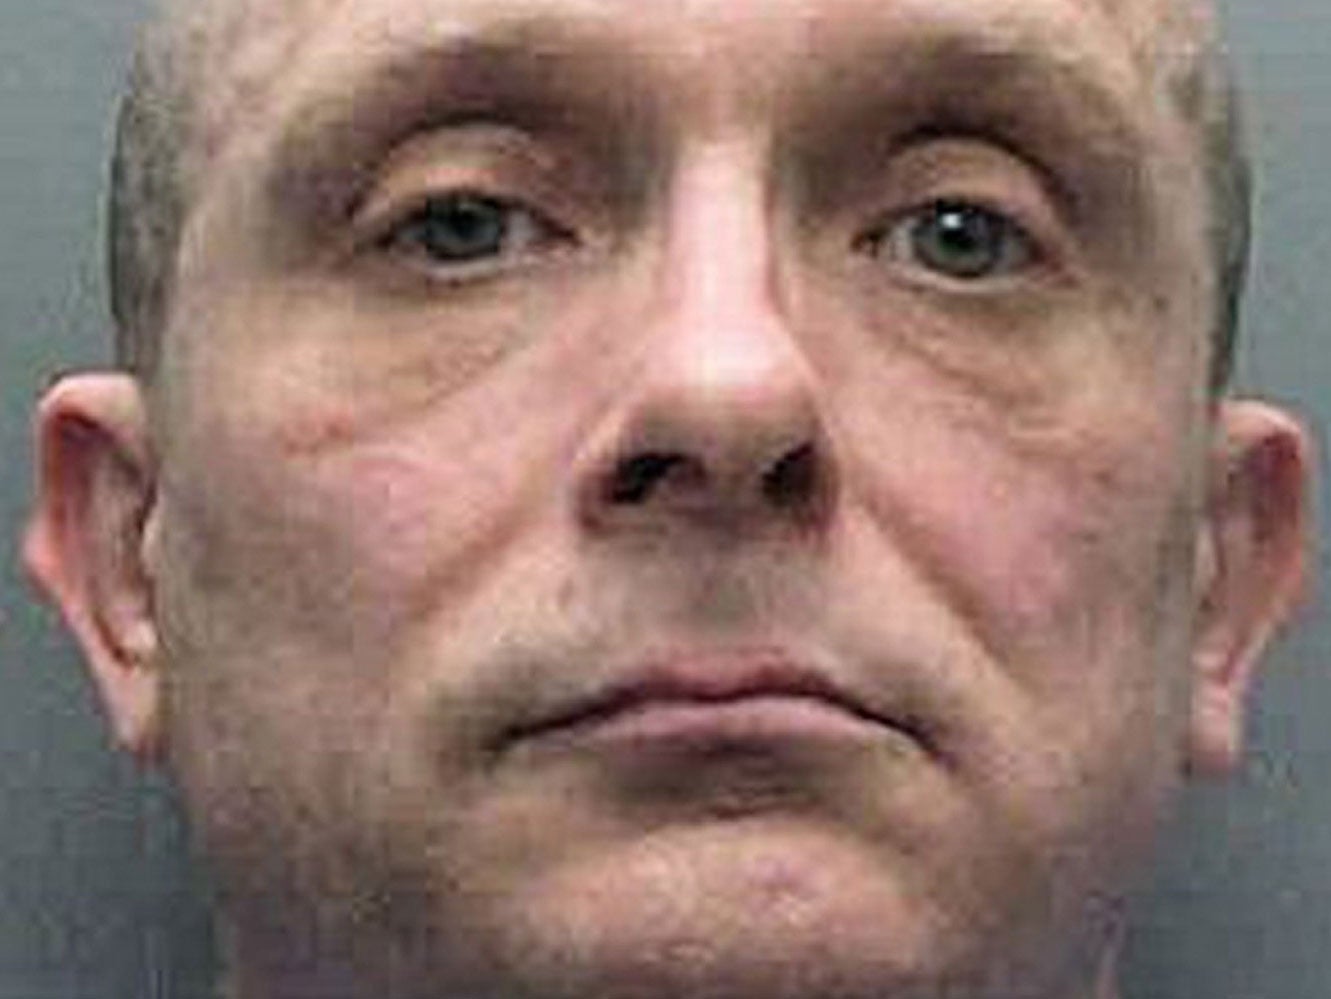 Russell Bishop has been convicted of the murders of Nicola Fellows and Karen Hadaway but in 1987 a jury took just two hours to clear him of the killings